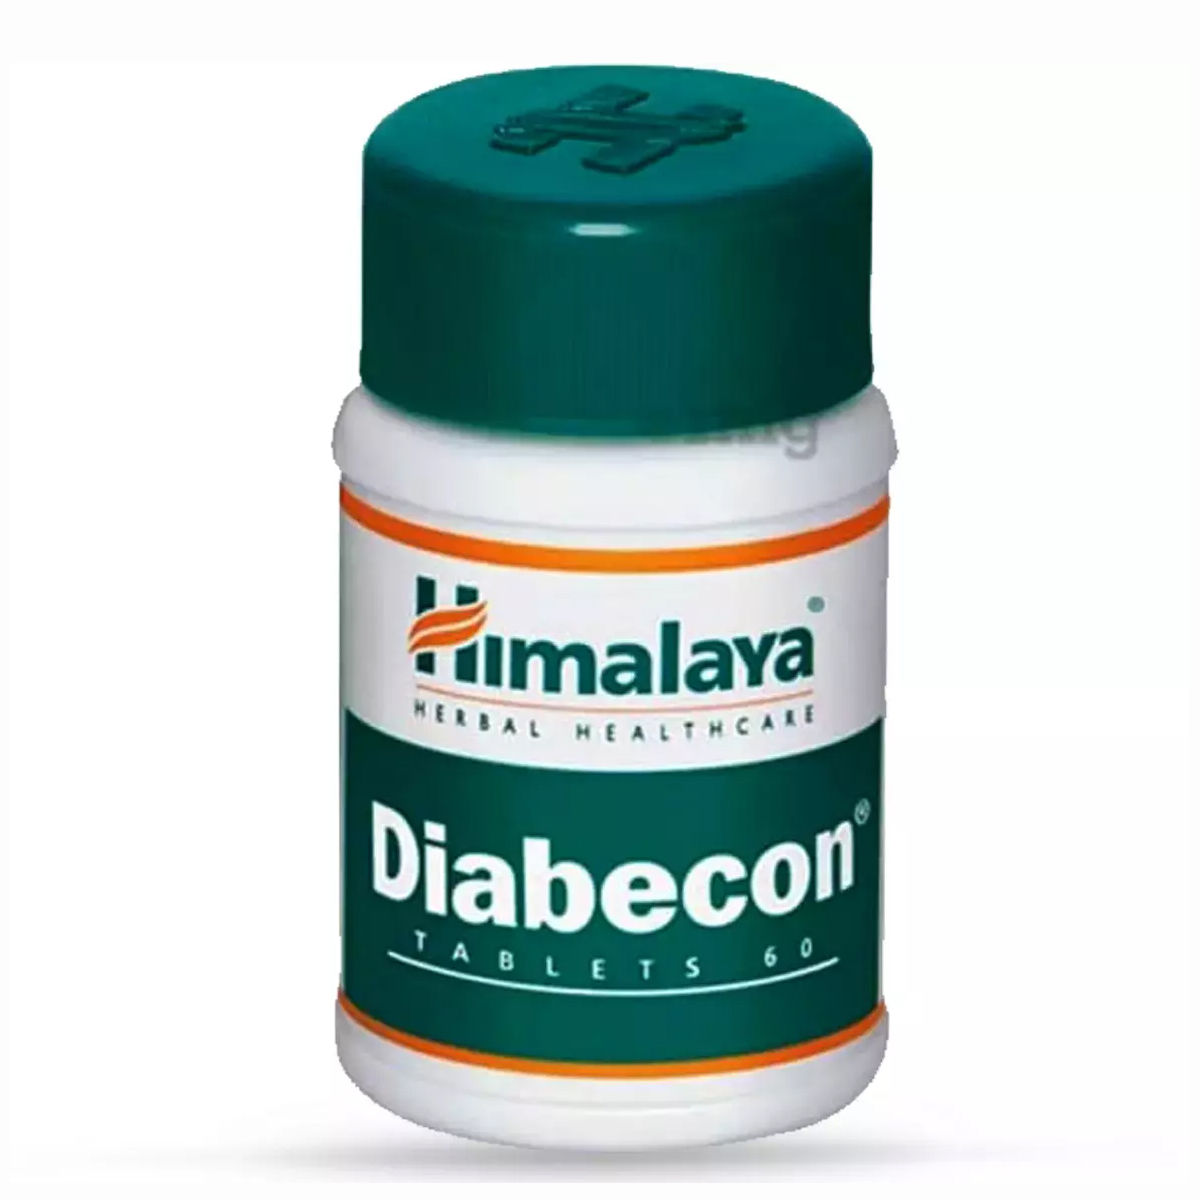 Himalaya Diabecon, 60 Tablets, Pack of 1 